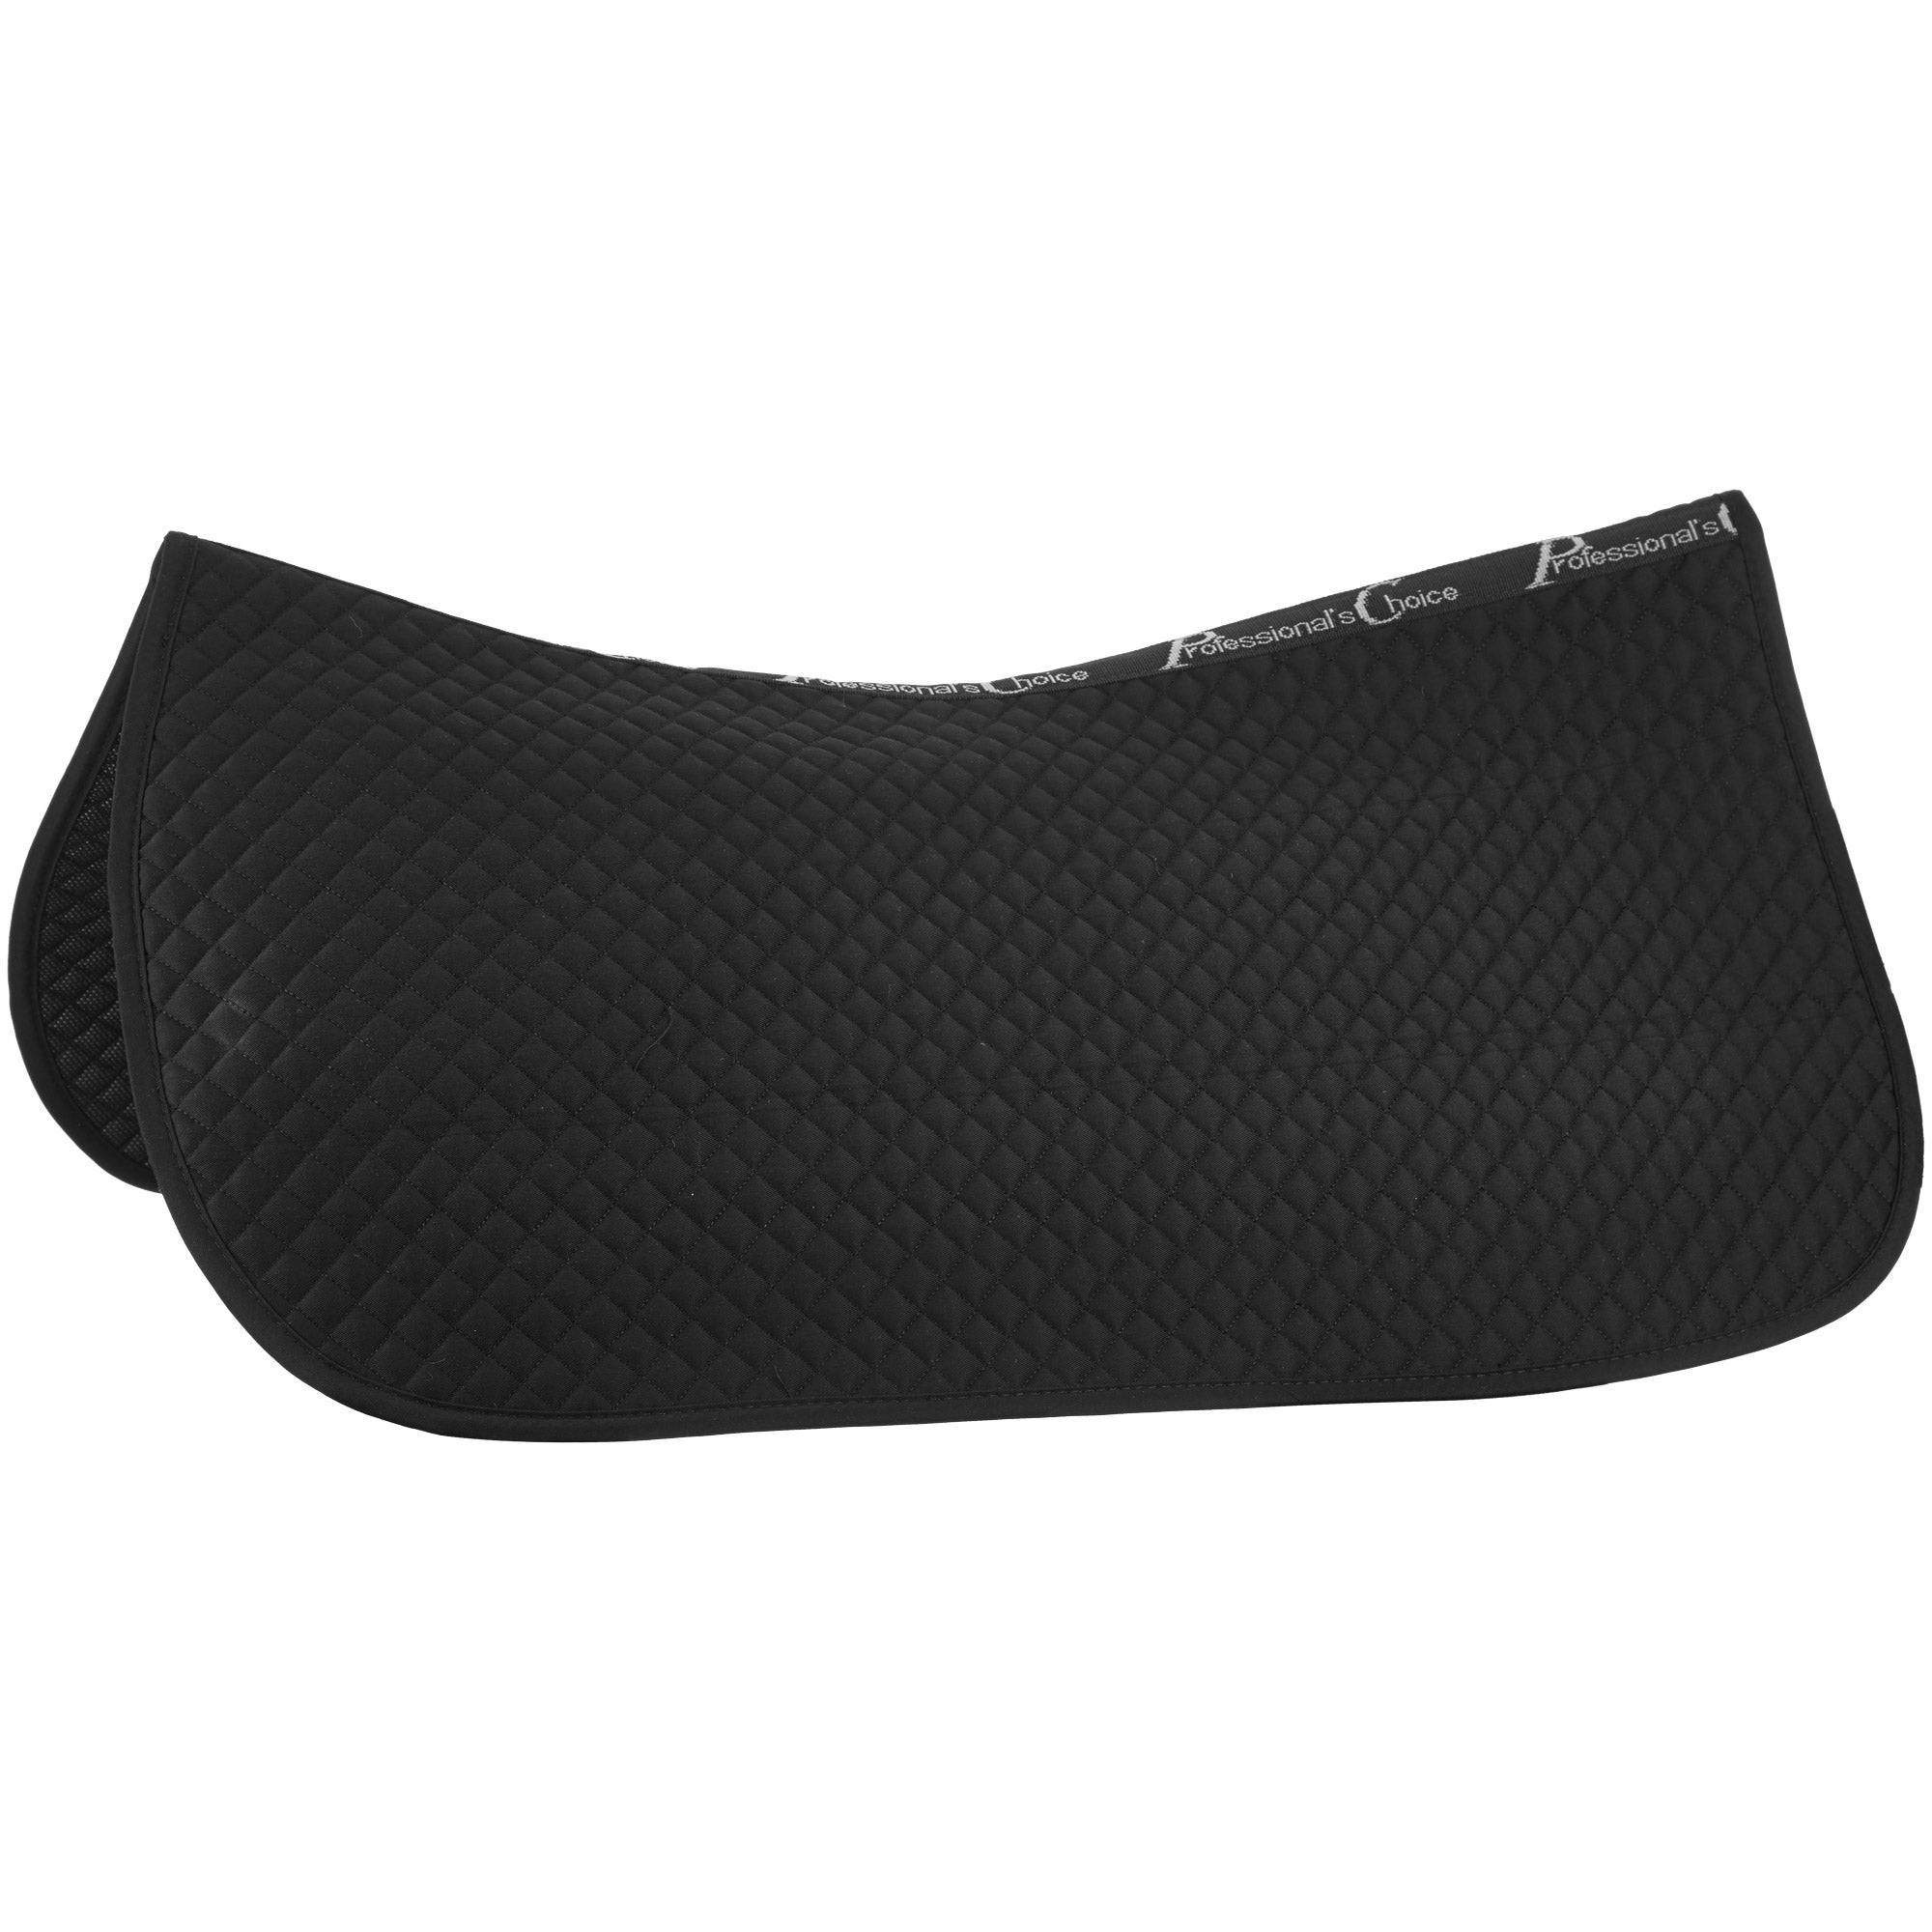 Contoured Saddle Pad Liner by Professional's Choice 